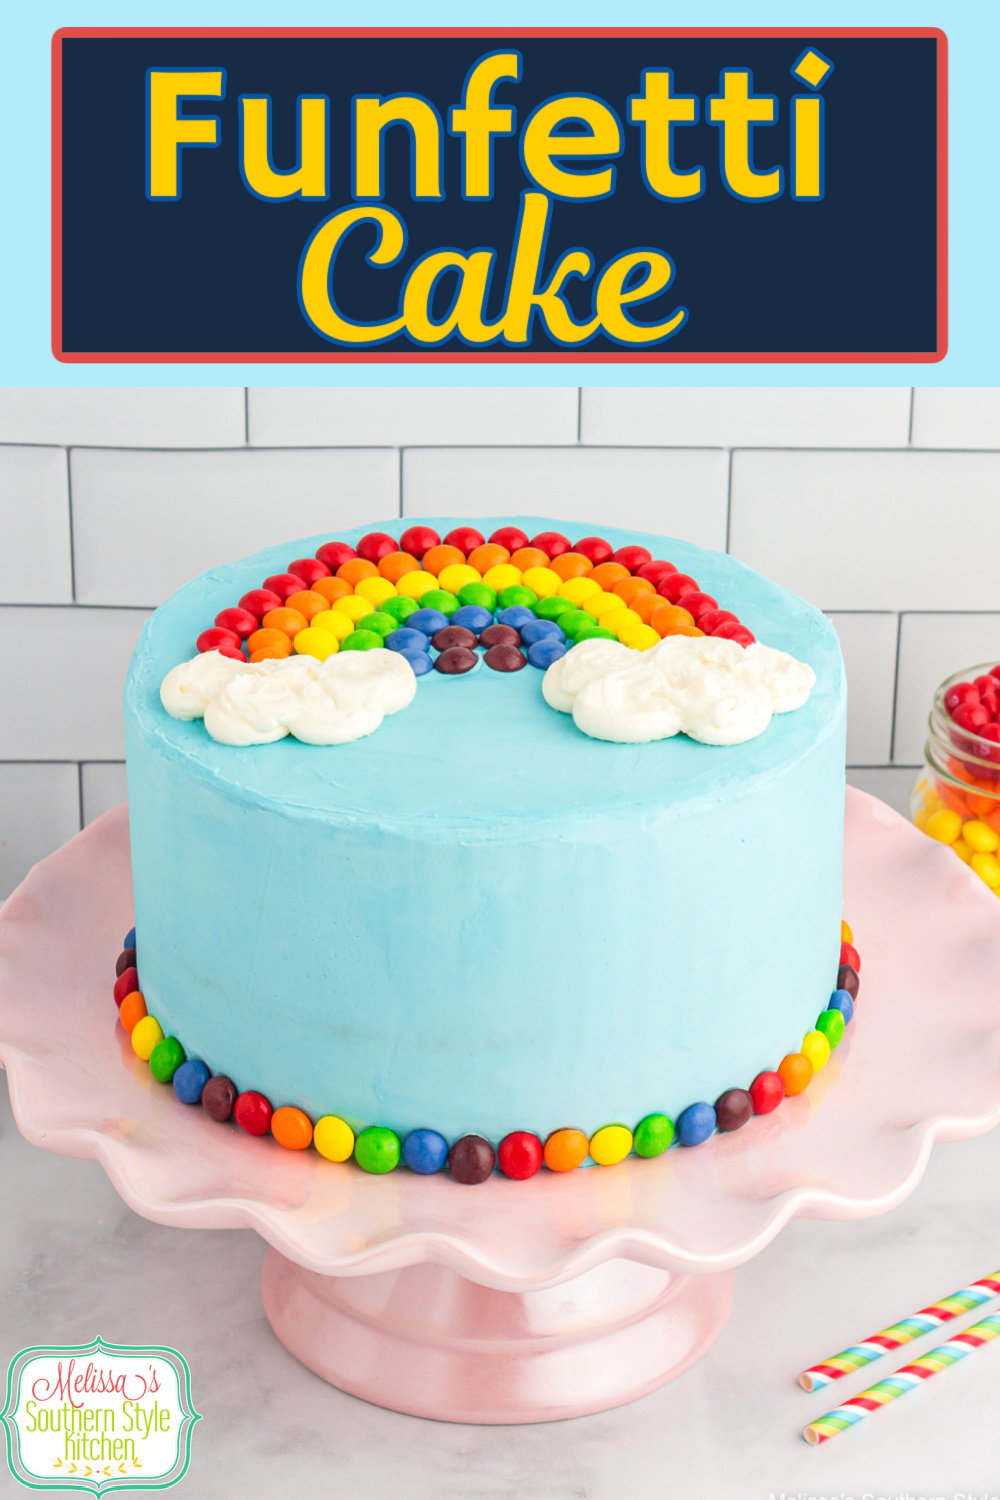 This Funfetti Cake is like a party in your mouth! Serve it for summer picnics, birthday parties, St Patrick's Day and more. #funfetticake #birthdaycake #sprinkles #rainbowcake #partyfood #cakes #cakerecipes via @melissasssk